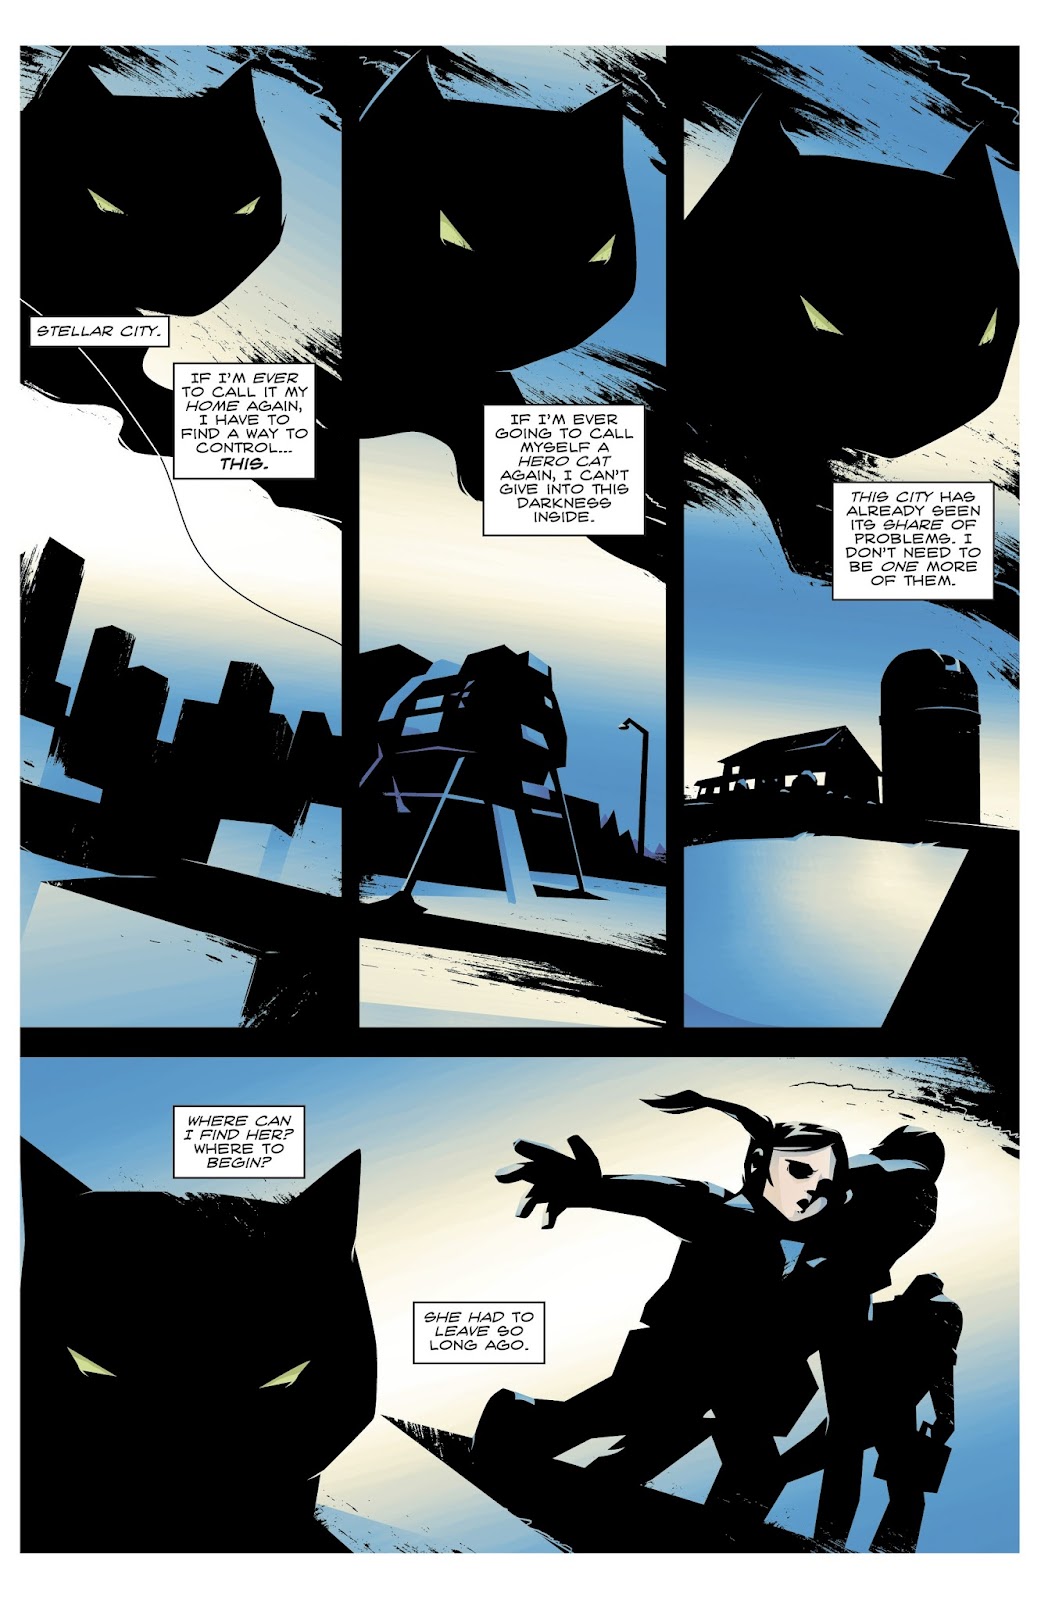 Hero Cats: Midnight Over Stellar City Vol. 2 issue 3 - Page 14